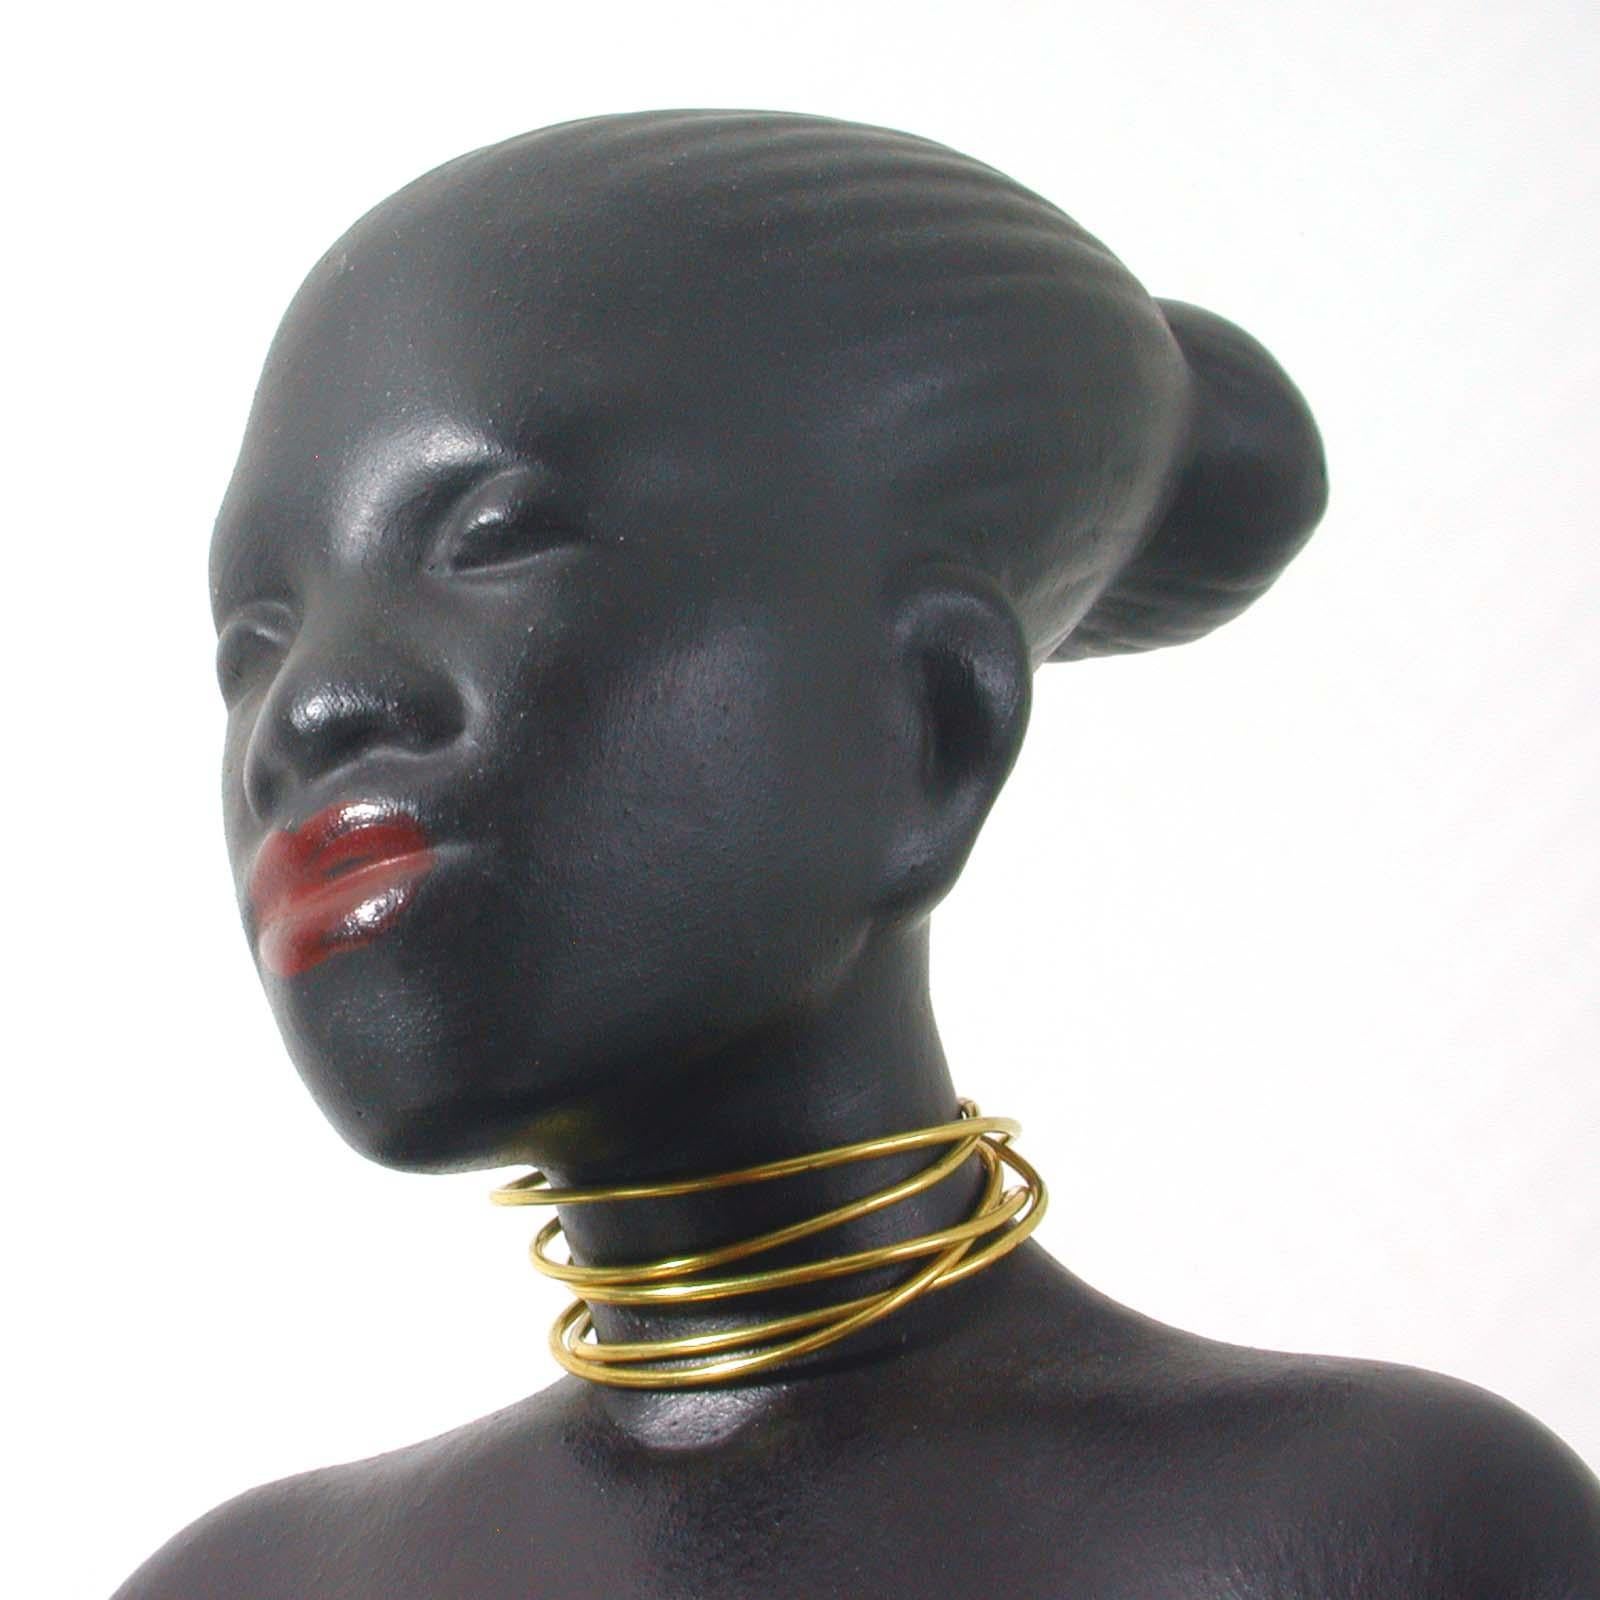 Mid-20th Century Midcentury African Woman Figurine by Albert Strunz for Cortendorf, 1950s For Sale